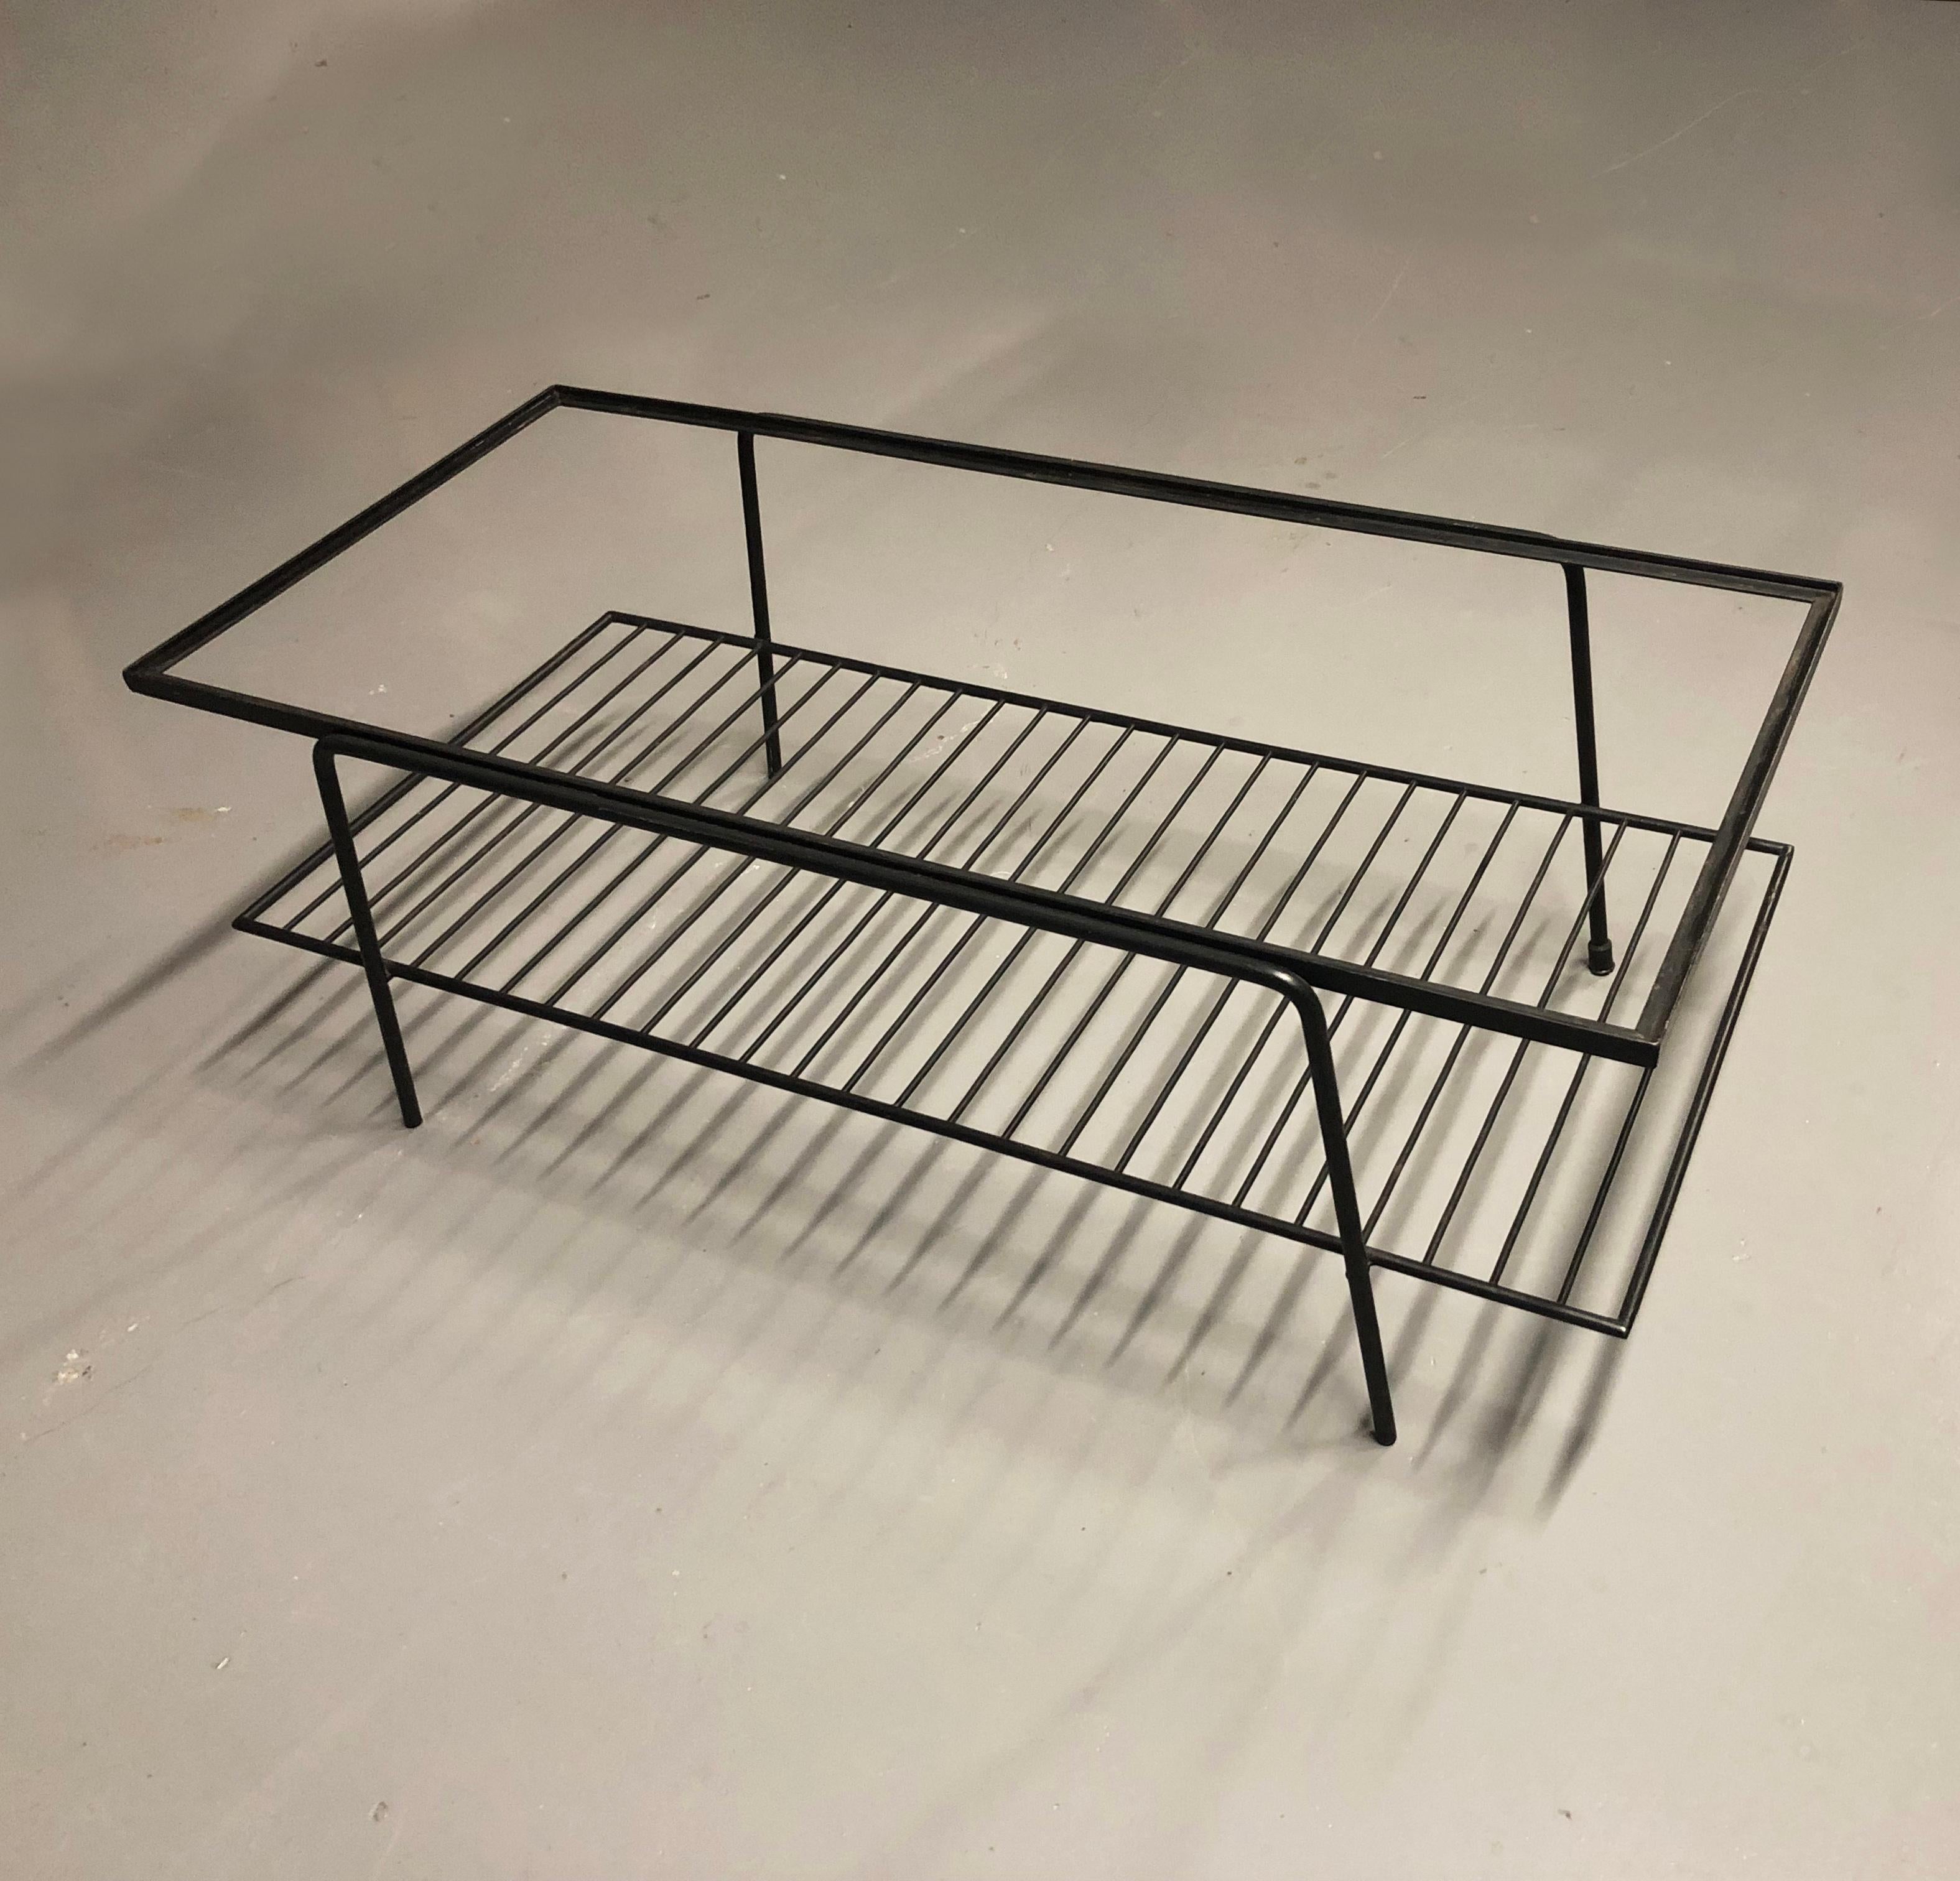 Rectangular midcentury coffee table in black painted solid steel, designed by Carlo Hauner for Forma. Brazil, circa. 1955

This table features the trademark light metal frame we see on many Hauner+Eisler’s designs: a midcentury delight of simplicity